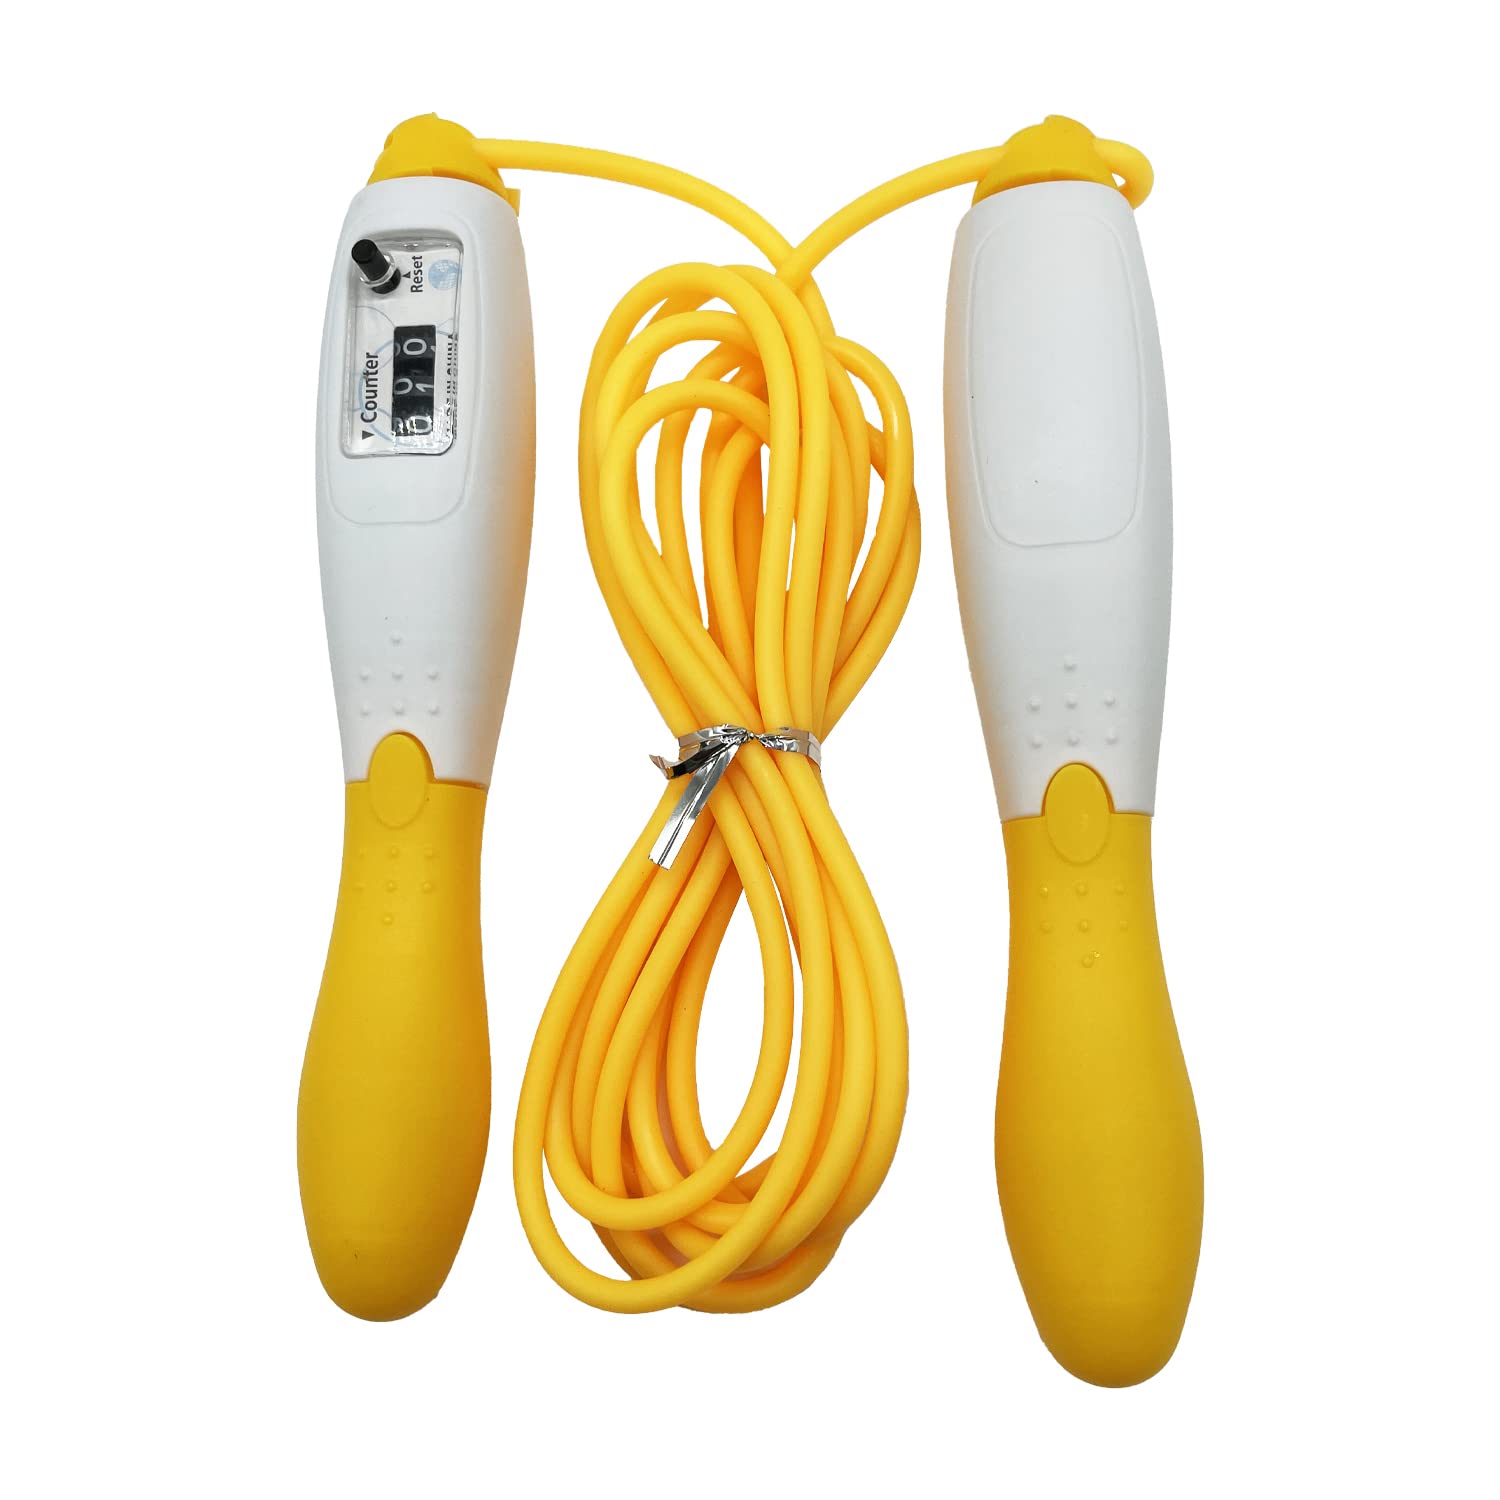 Counting Fitness Skipping Rope - Home Essentials Store Retail